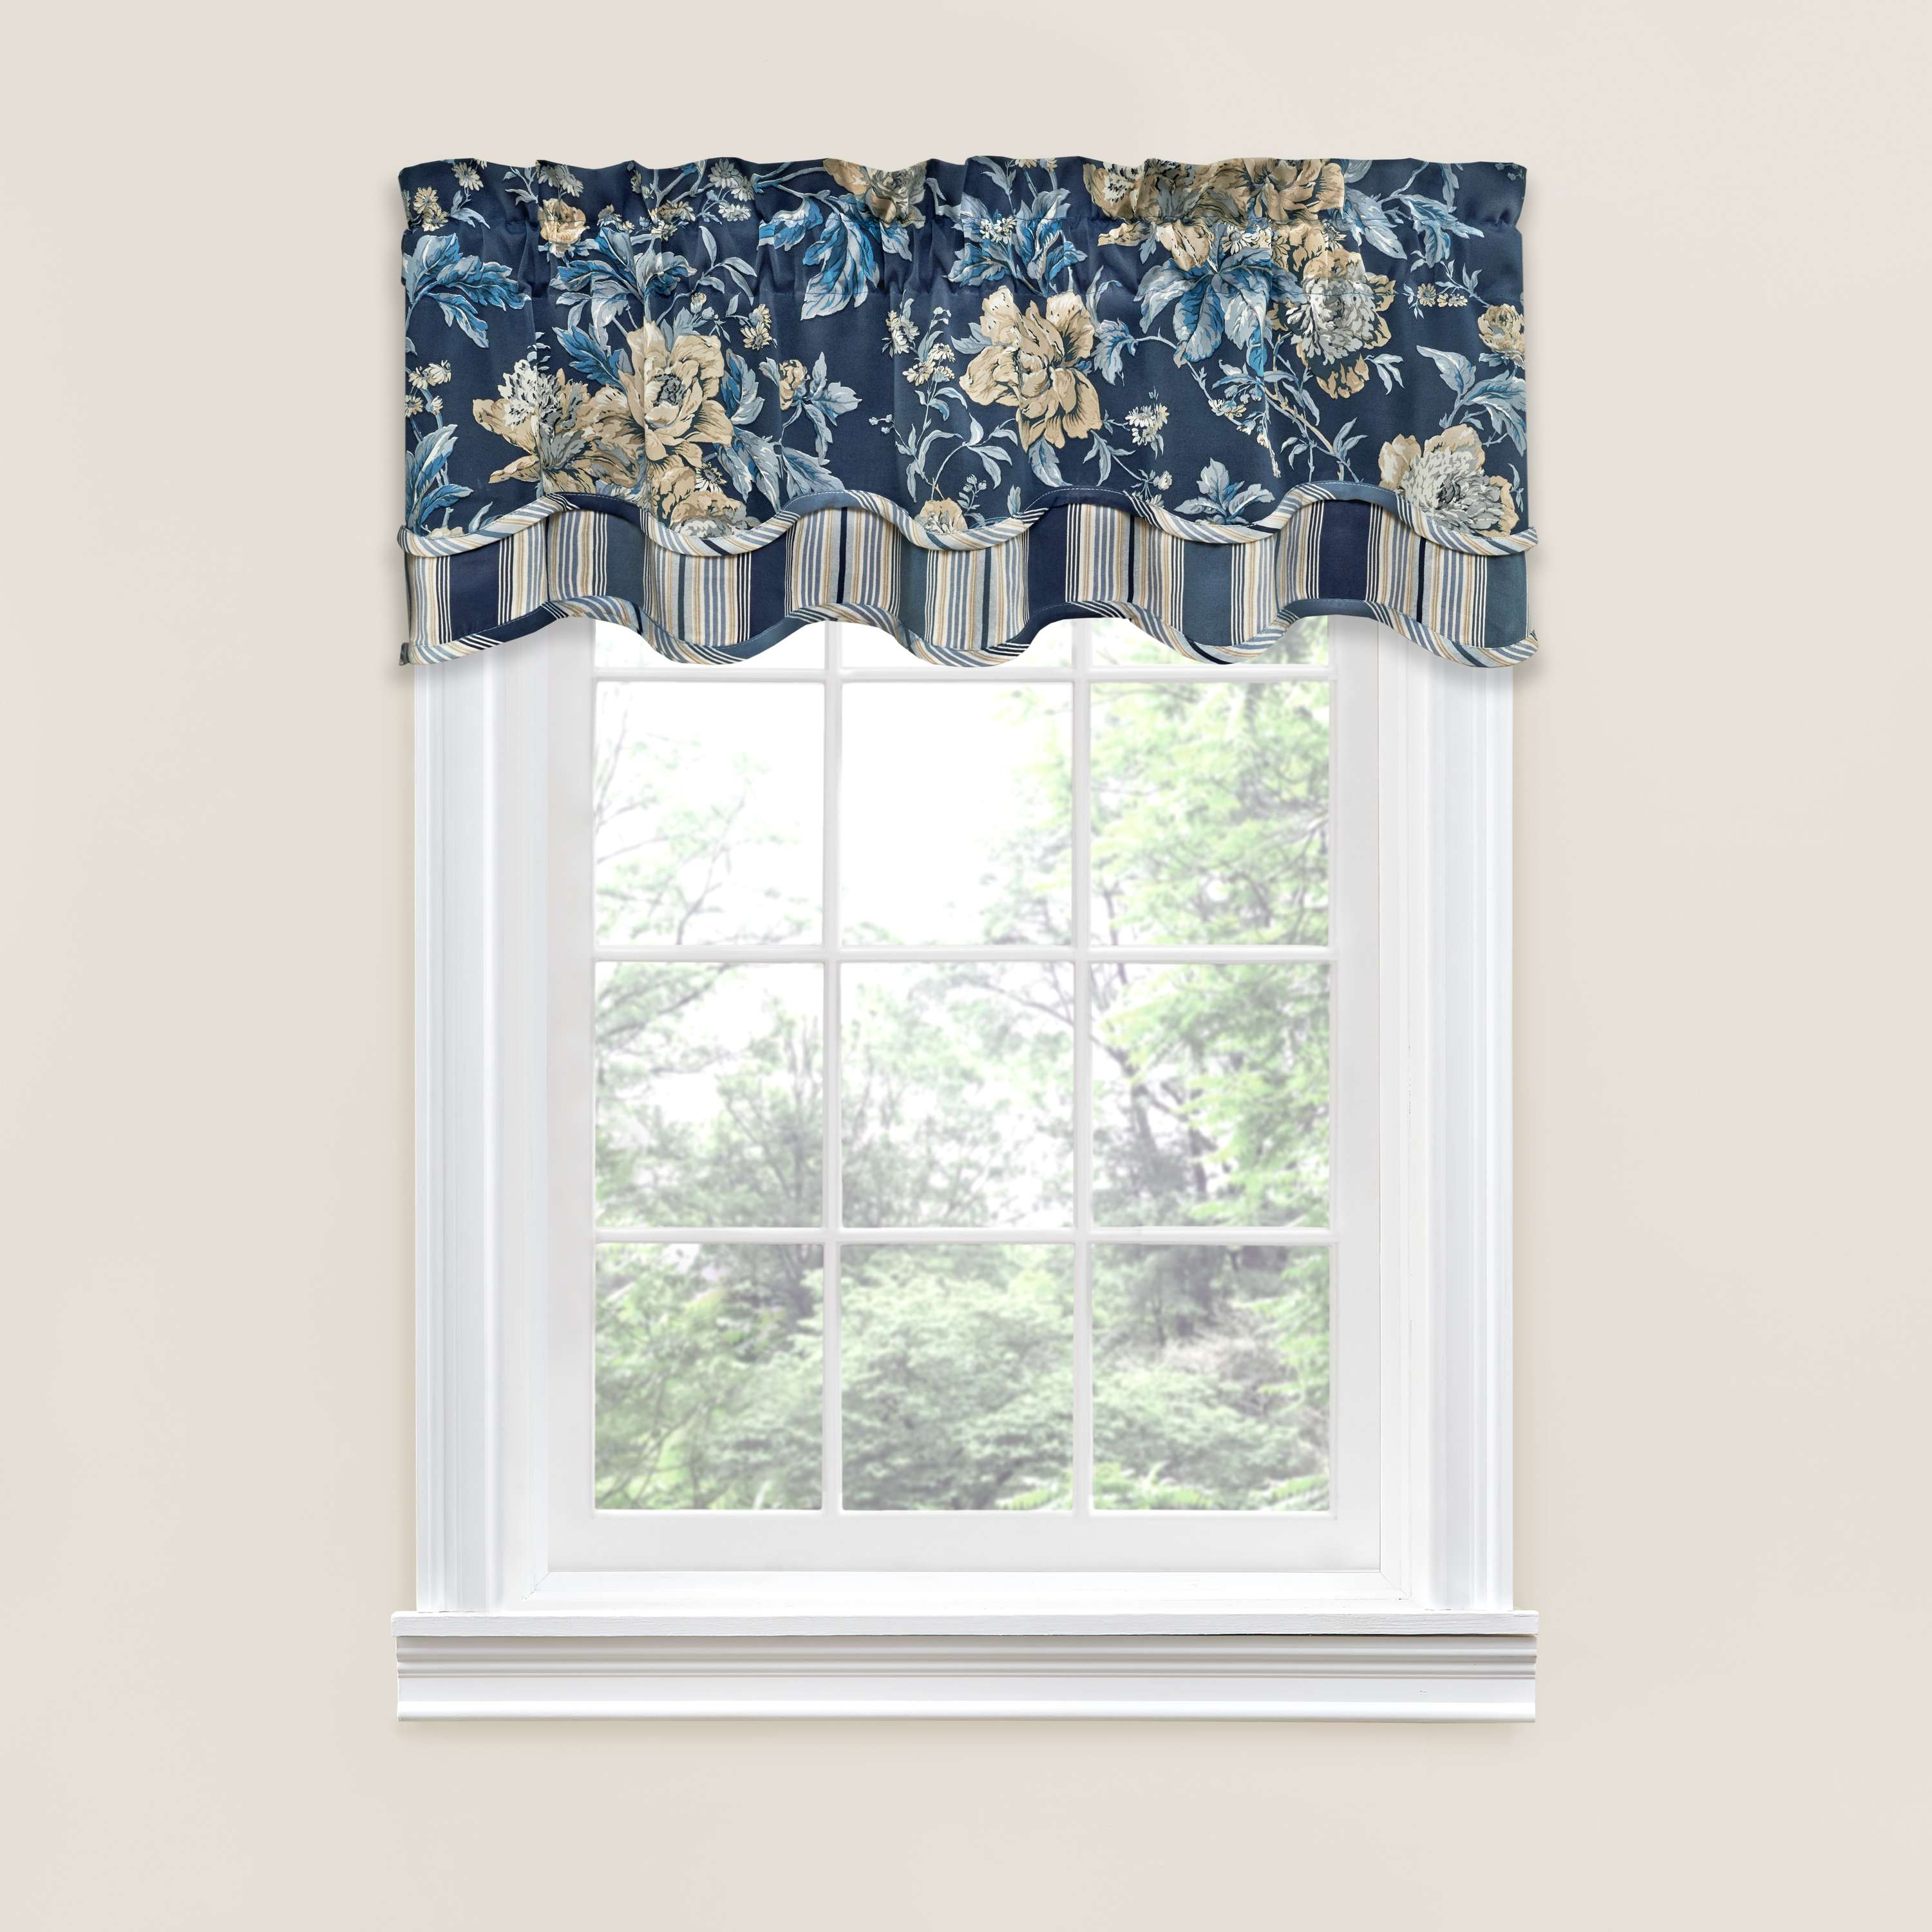 Details about   WAVERLY BLUE & WHITE FLORAL DOUBLE GATHERED VALANCE 